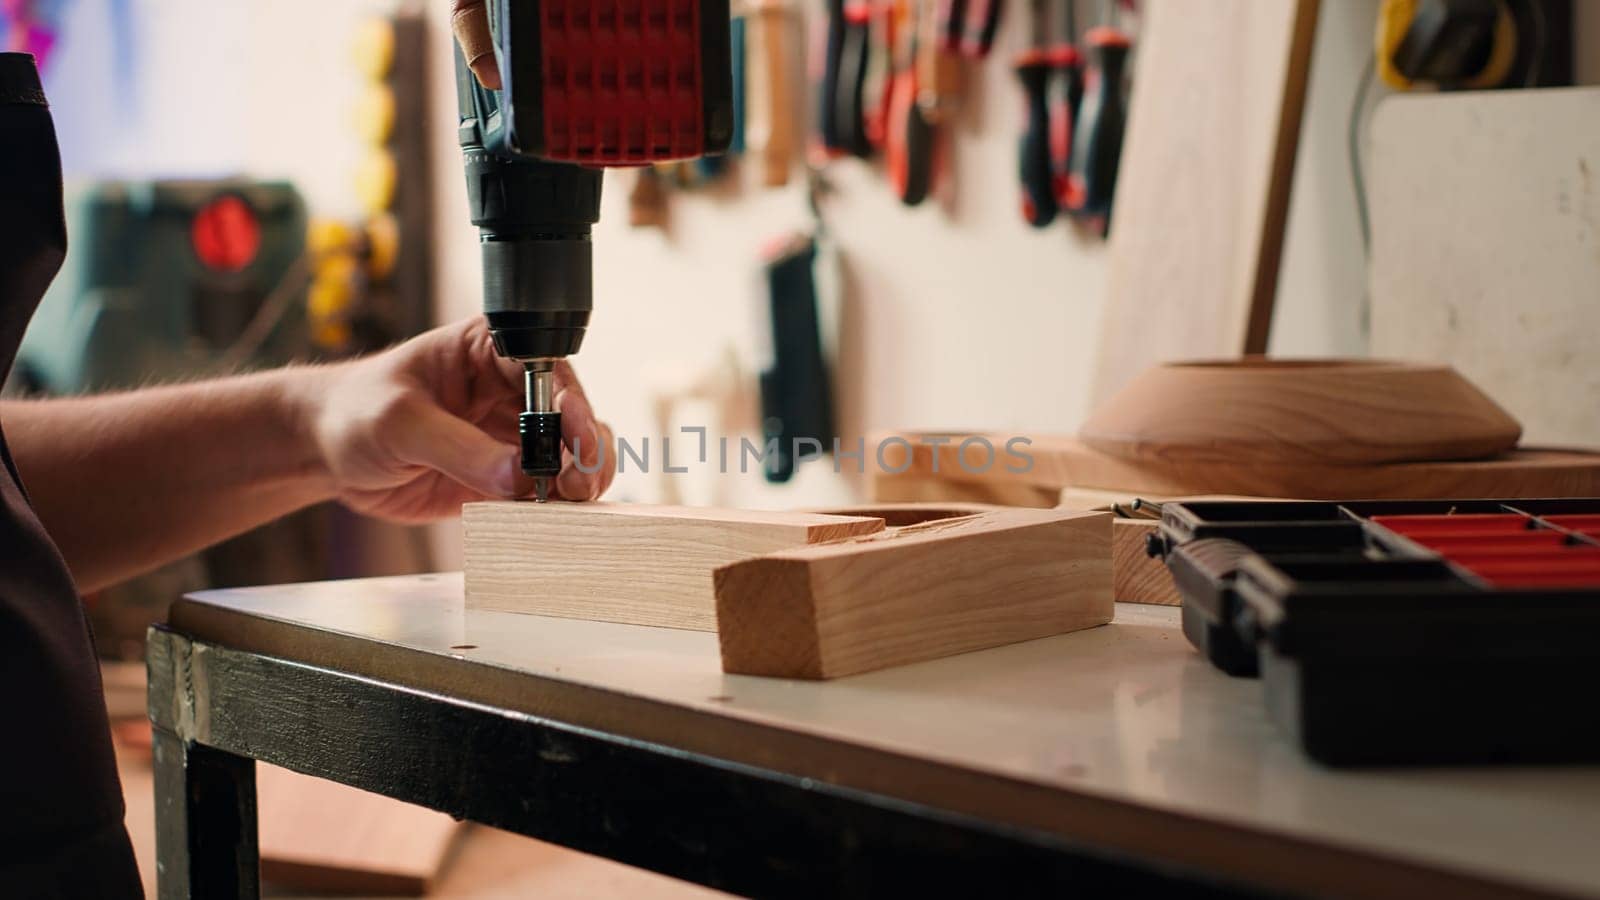 Manufacturer in assembly shop picking screw from tool box by DCStudio